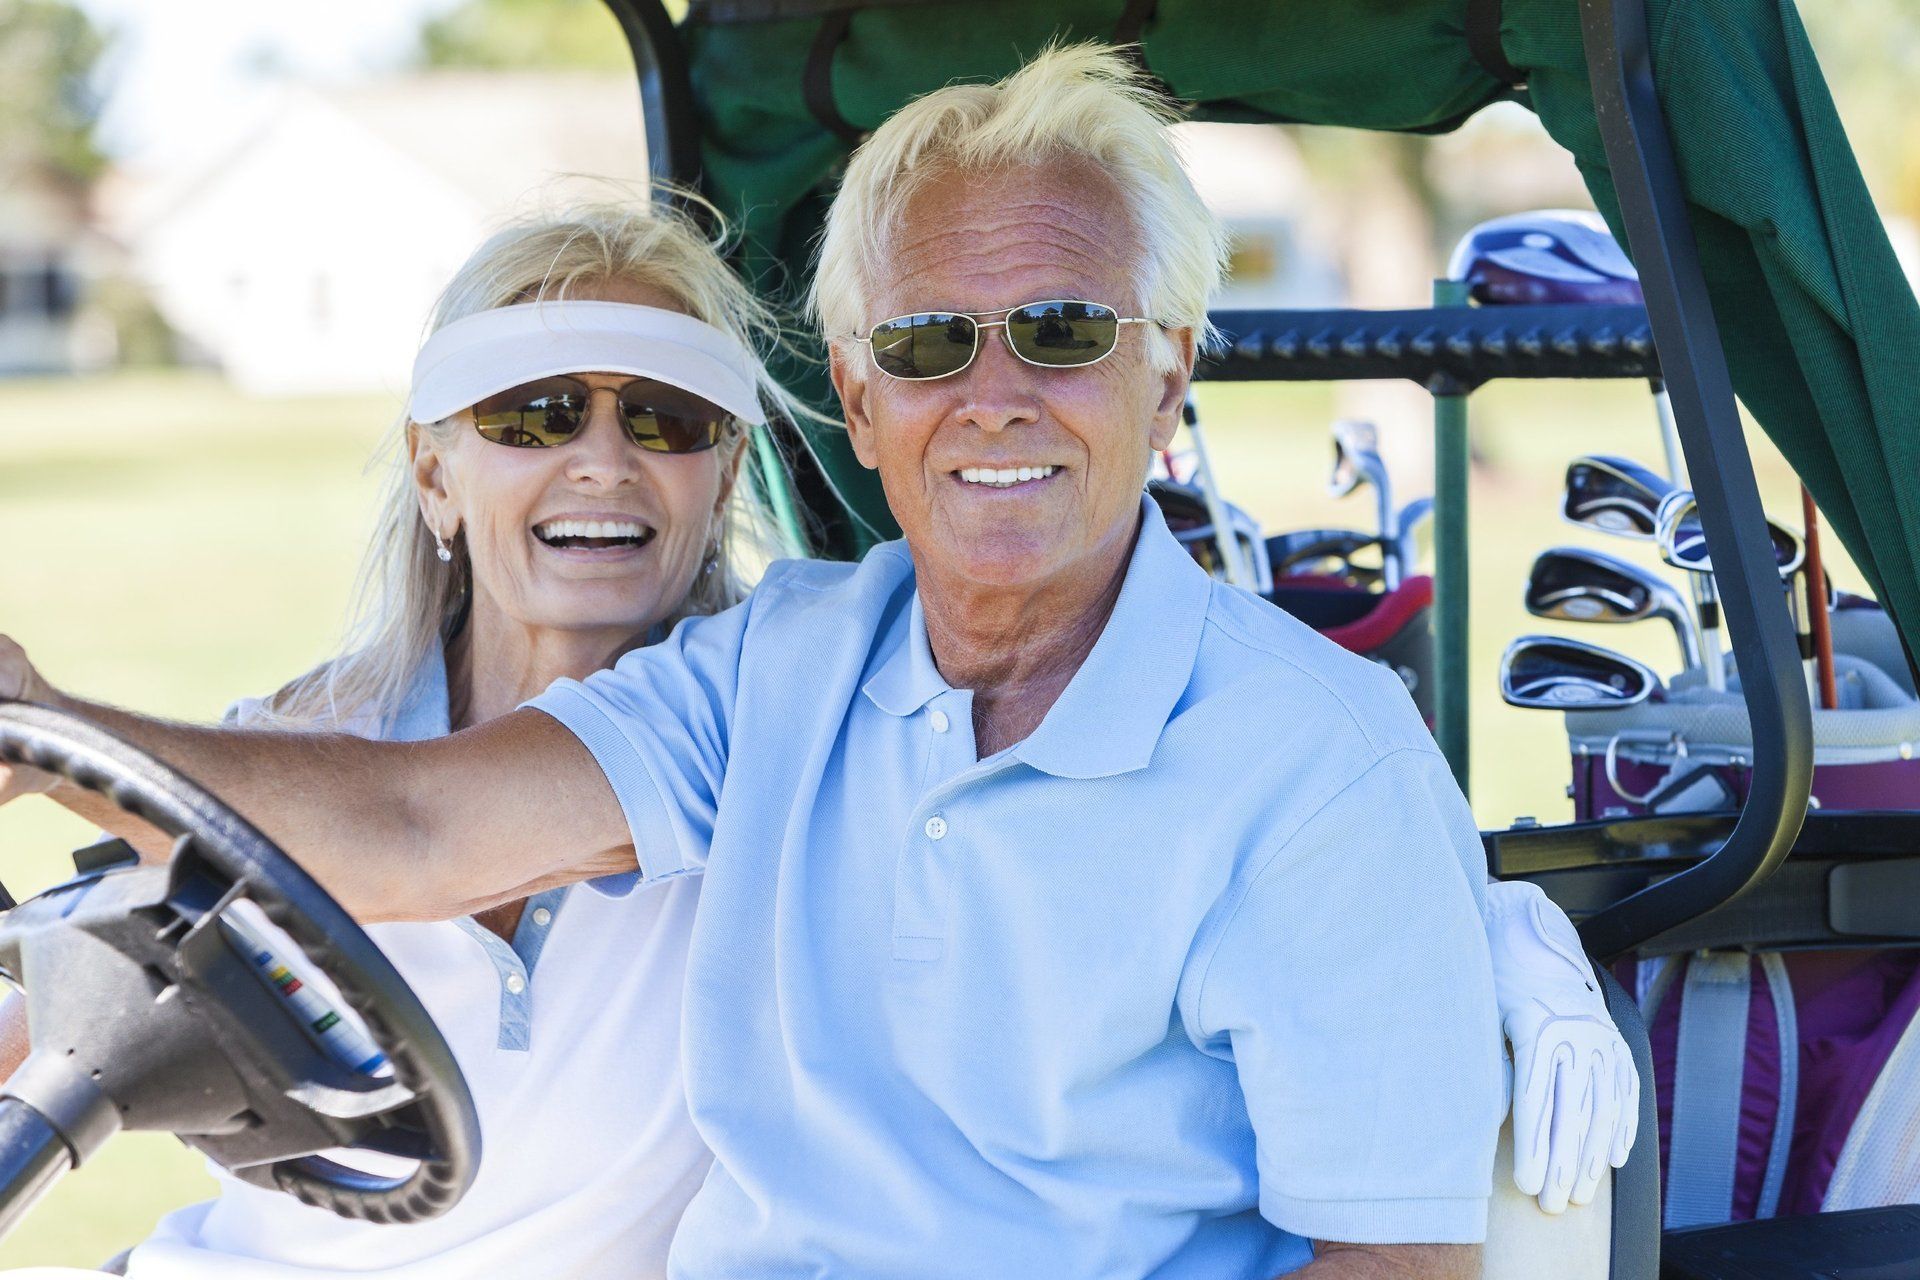 A retired husband and wife riding in a golf cart, at the golf club.